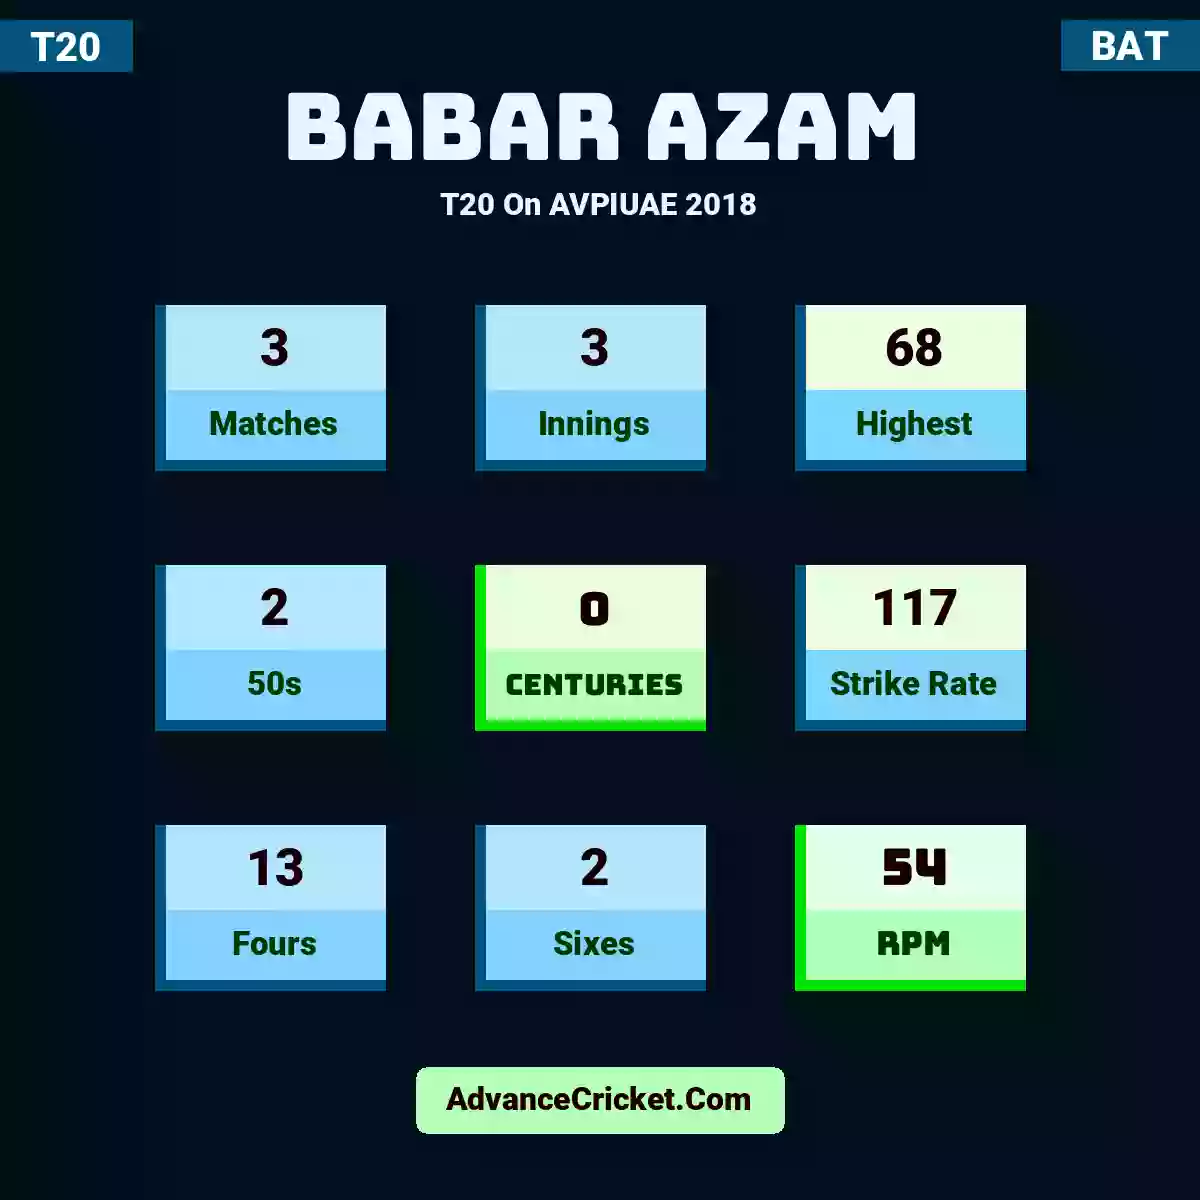 Babar Azam T20  On AVPIUAE 2018, Babar Azam played 3 matches, scored 68 runs as highest, 2 half-centuries, and 0 centuries, with a strike rate of 117. B.Azam hit 13 fours and 2 sixes, with an RPM of 54.